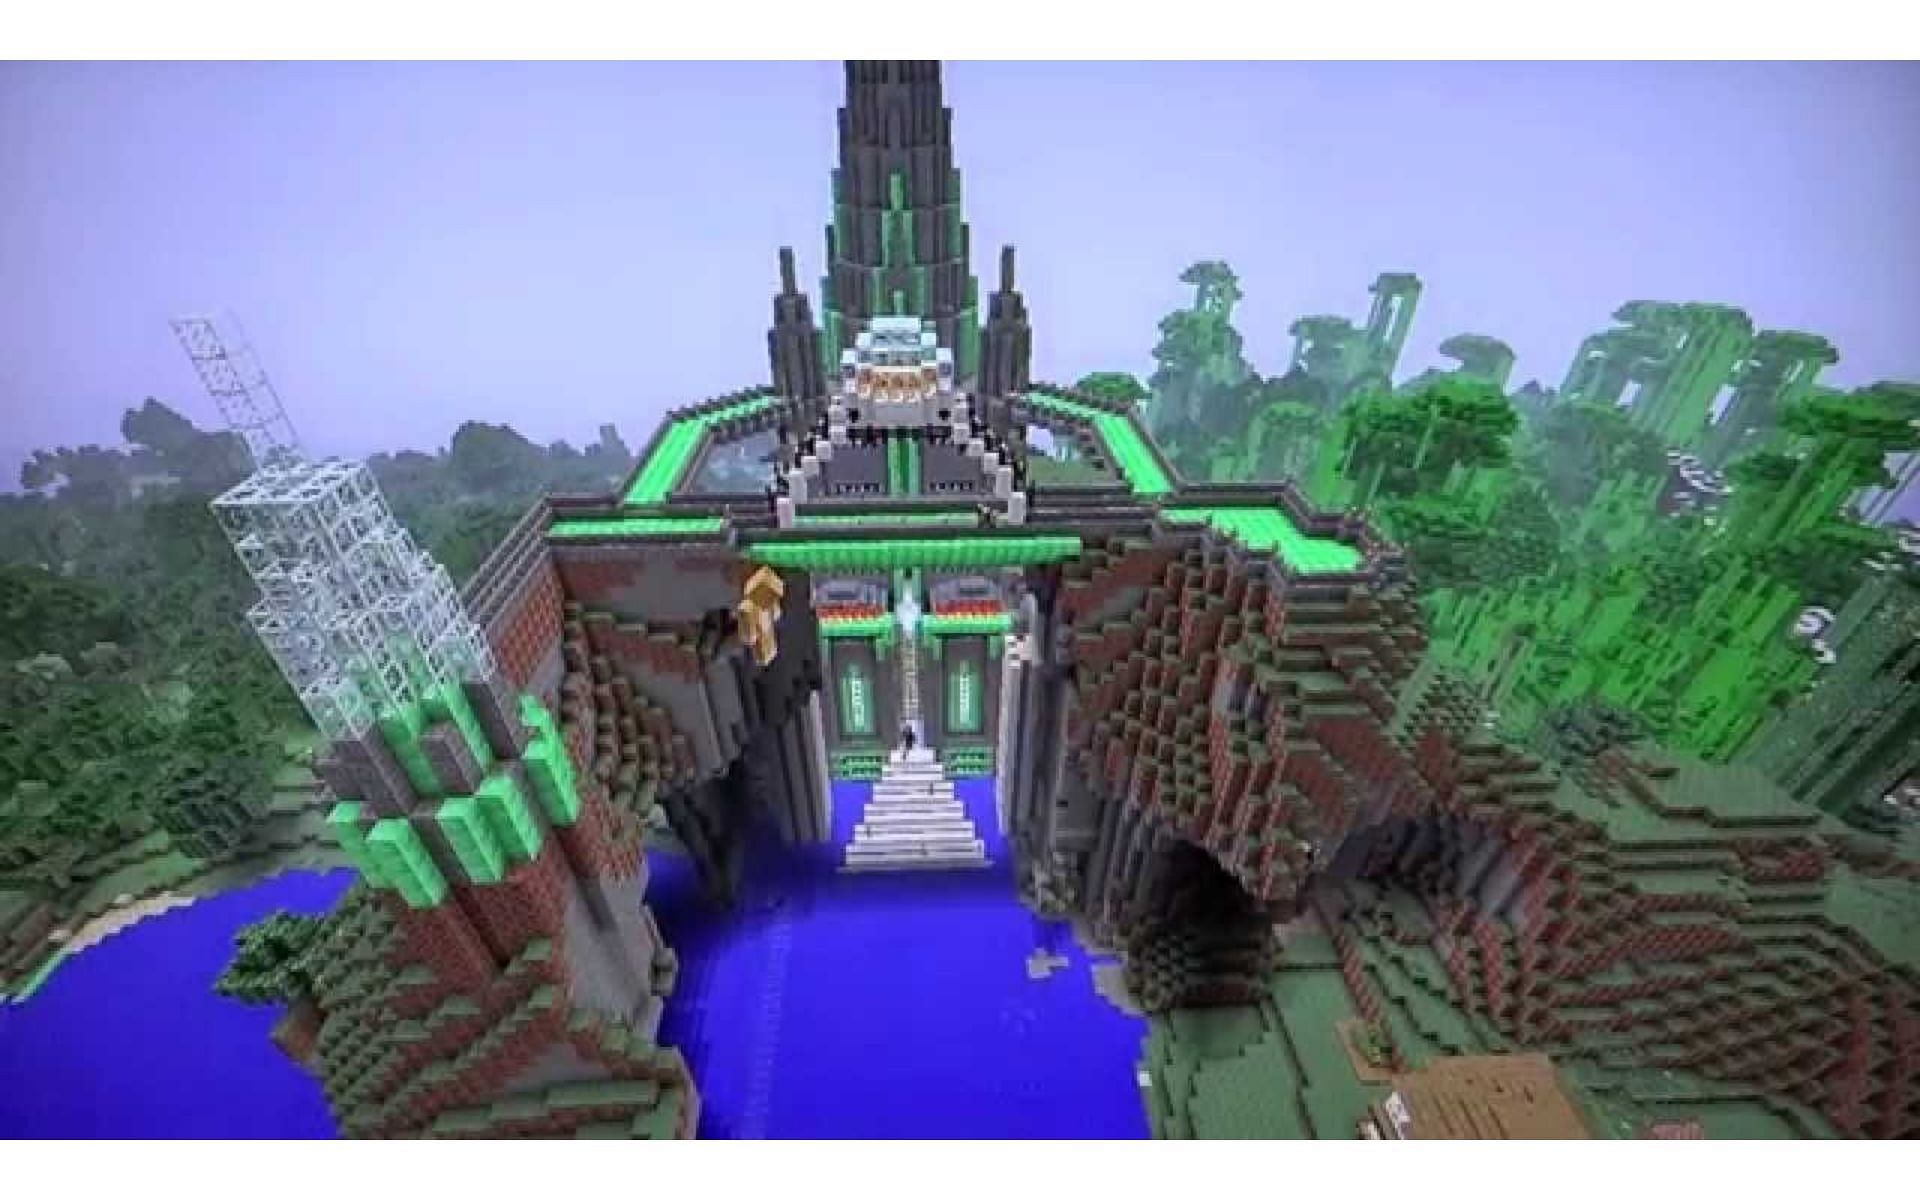 Players can get breathtaking views from this castle (Image via YouTube/puzzledeinstein)